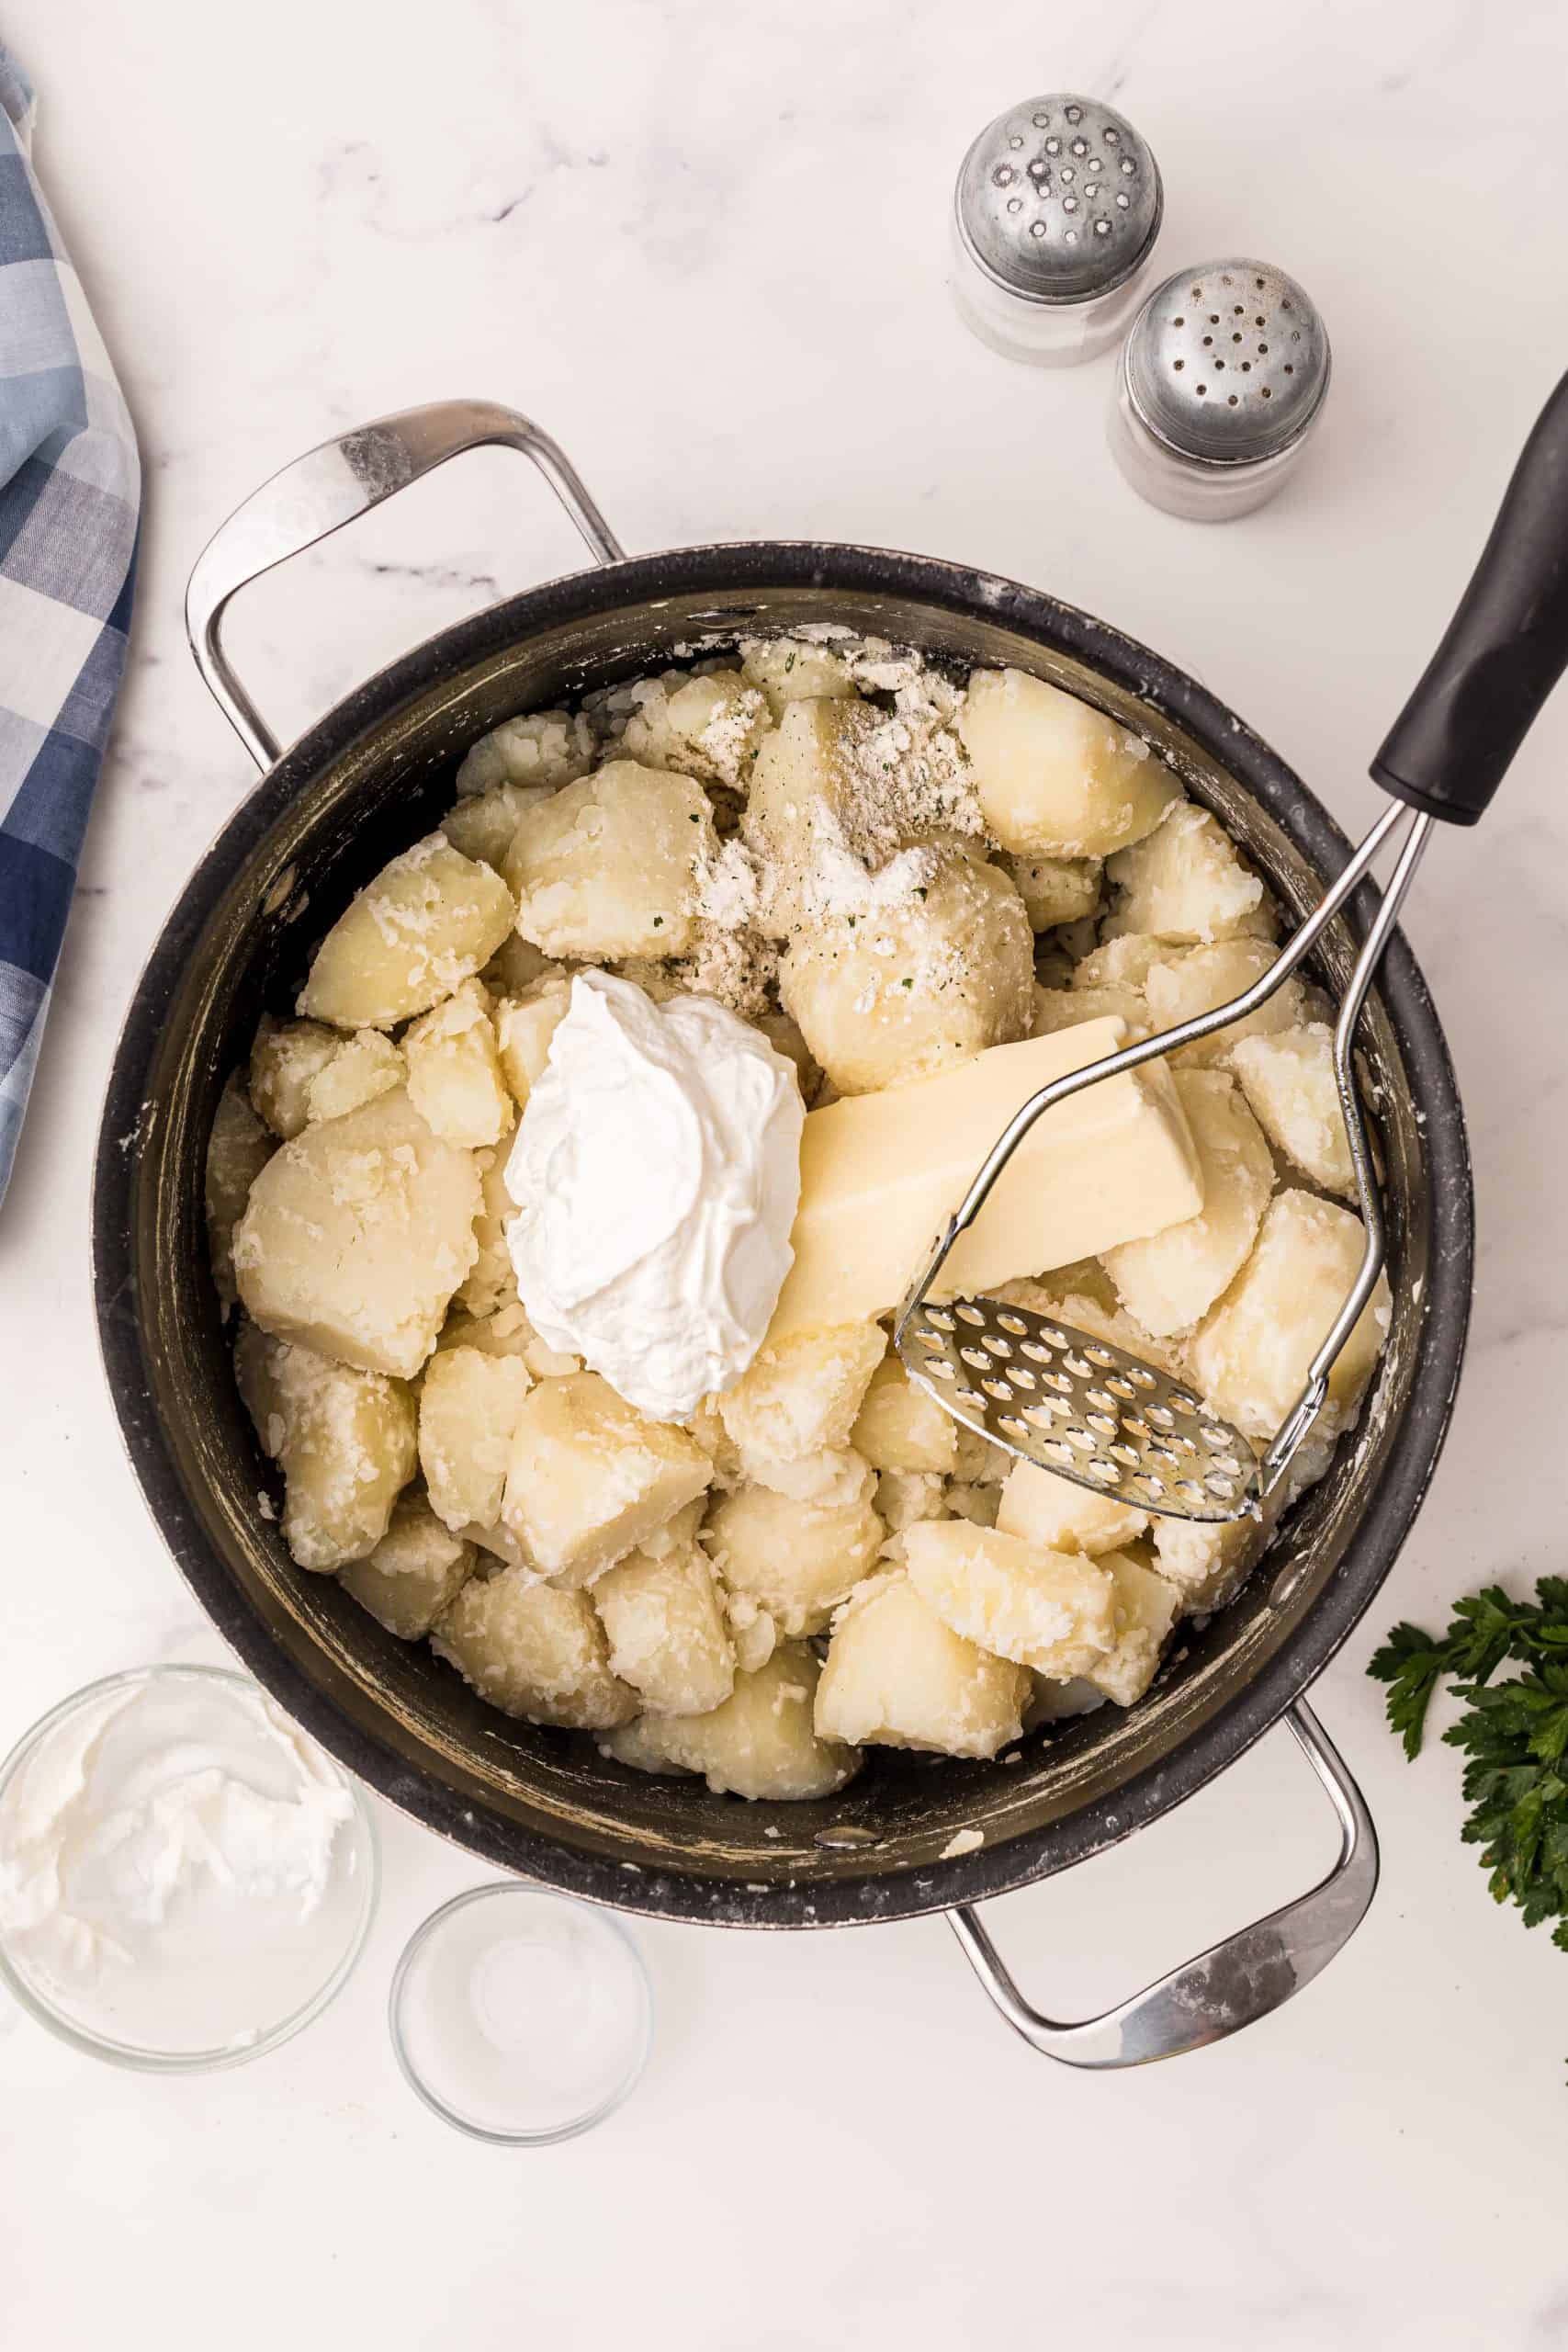 Sour cream, butter and ranch seasoning added to cooked potatoes in a large pot.